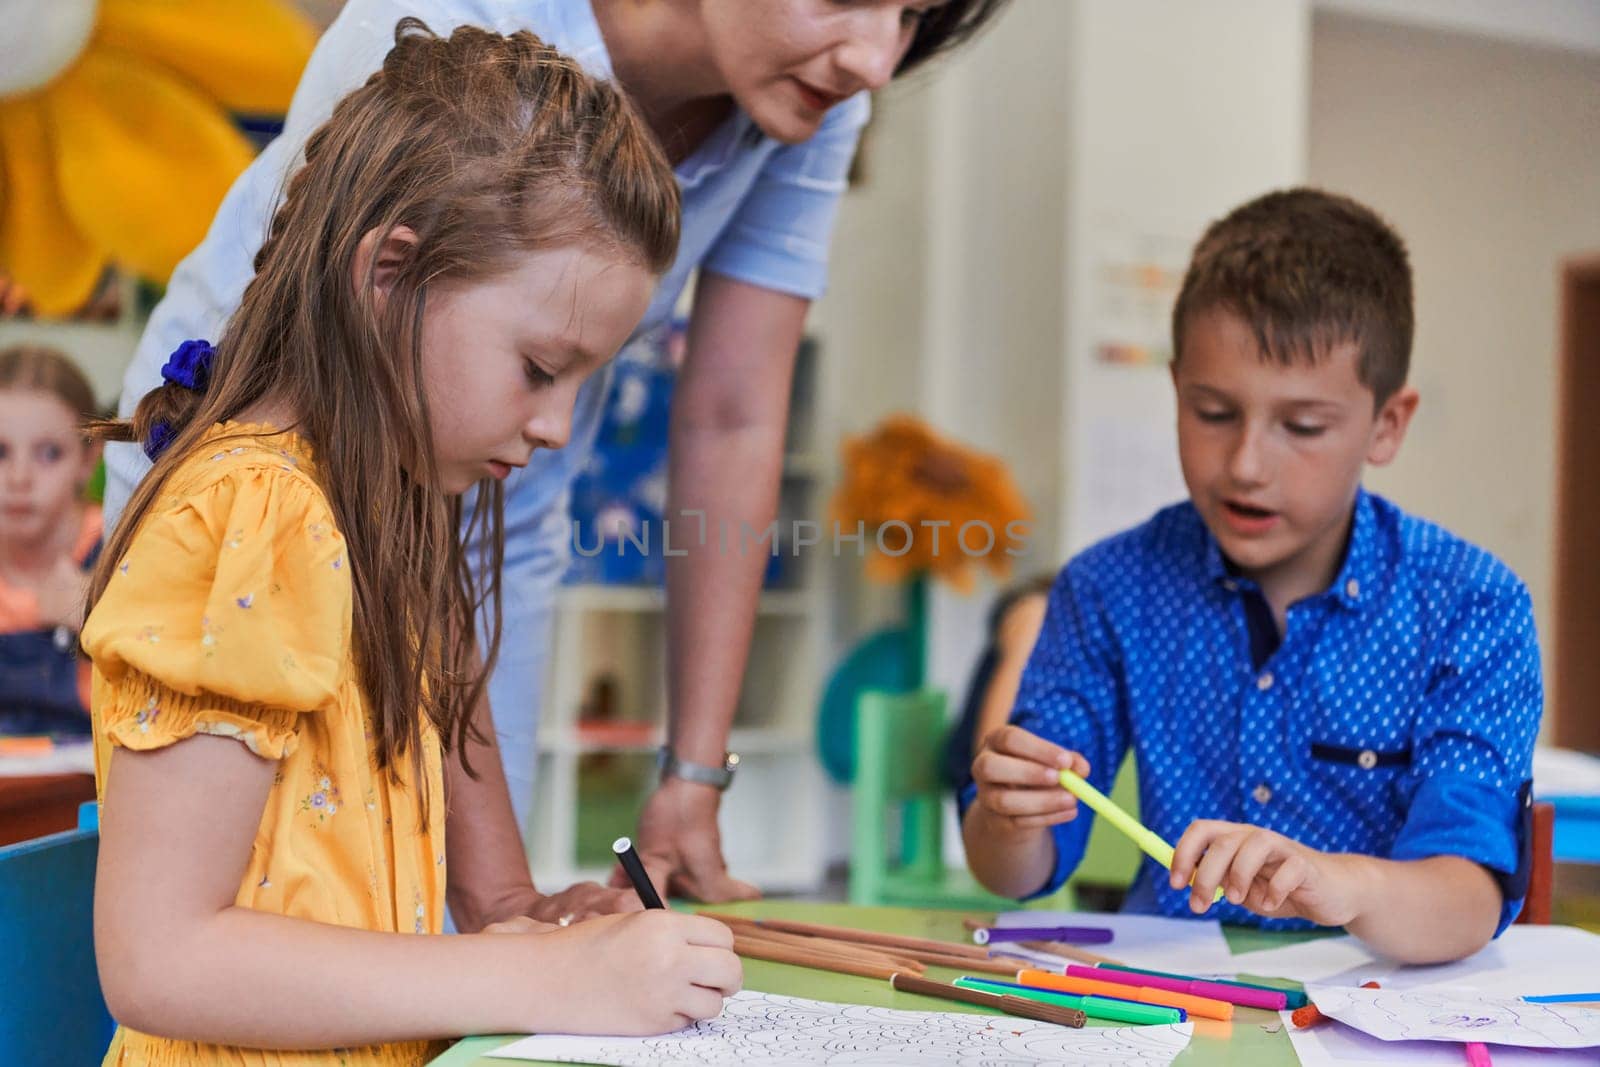 Creative kids during an art class in a daycare center or elementary school classroom drawing with female teacher